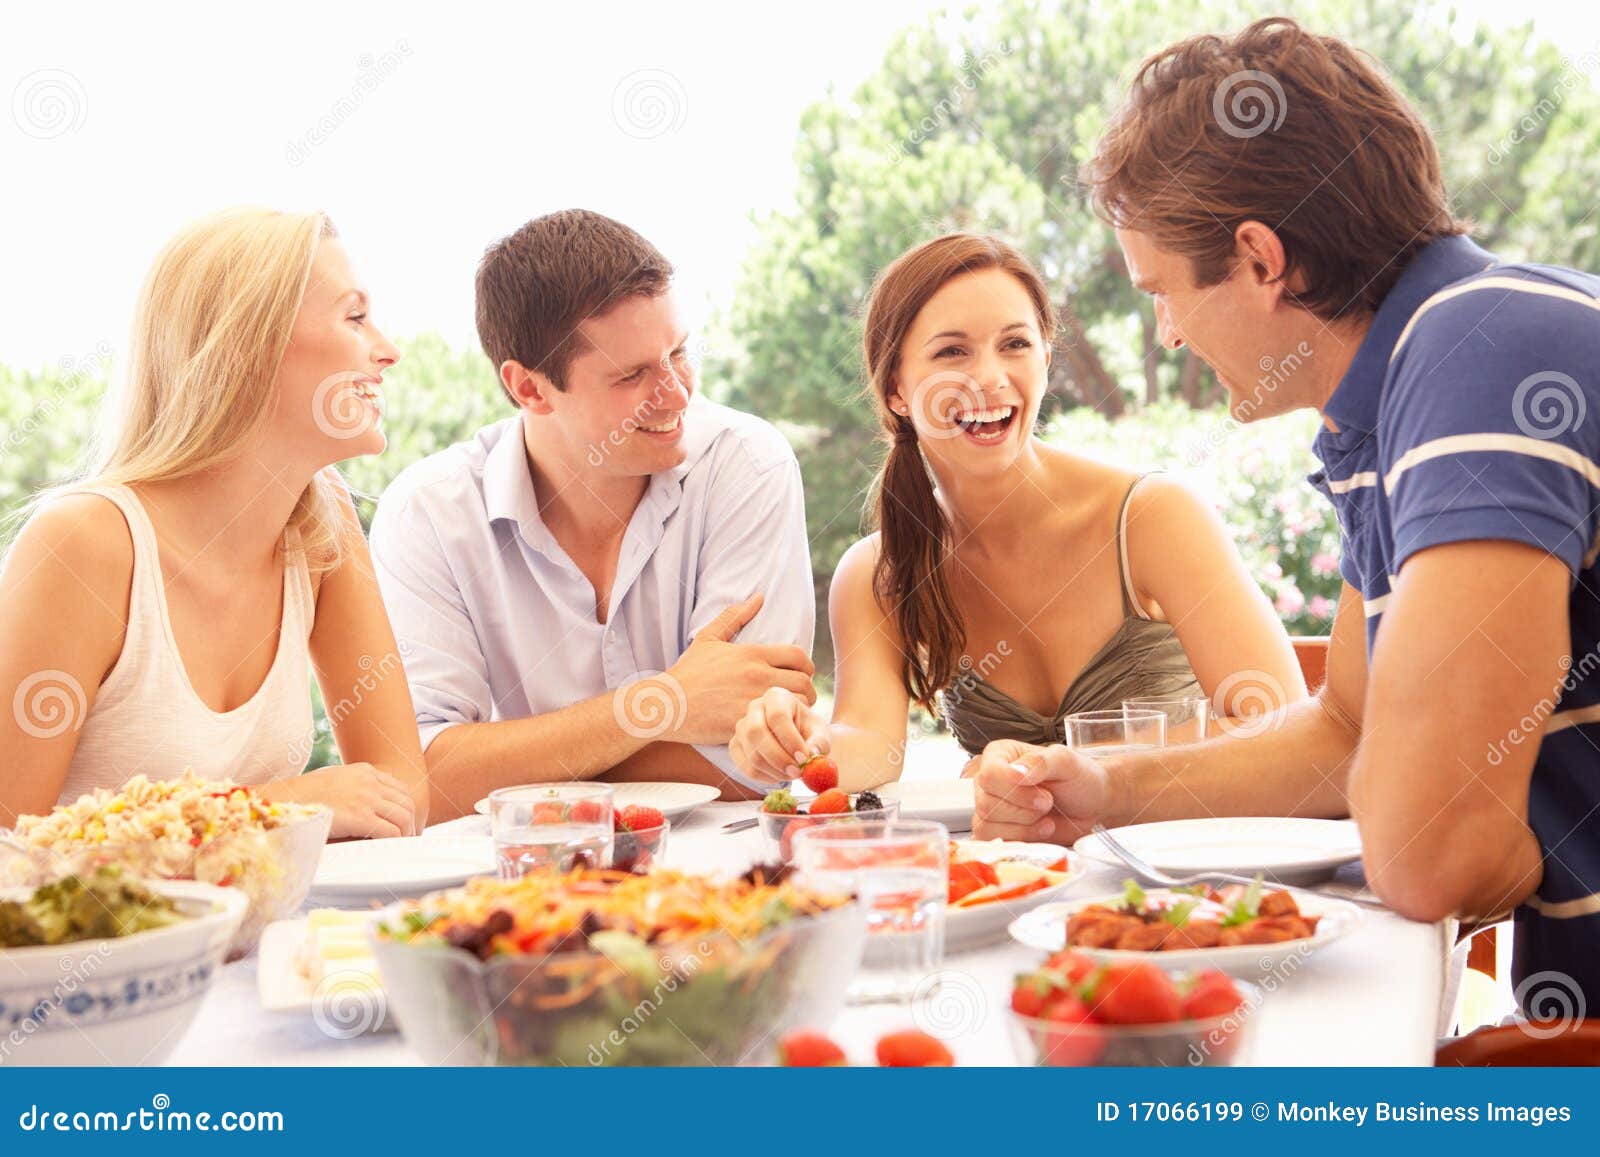 two young couples eating outdoors